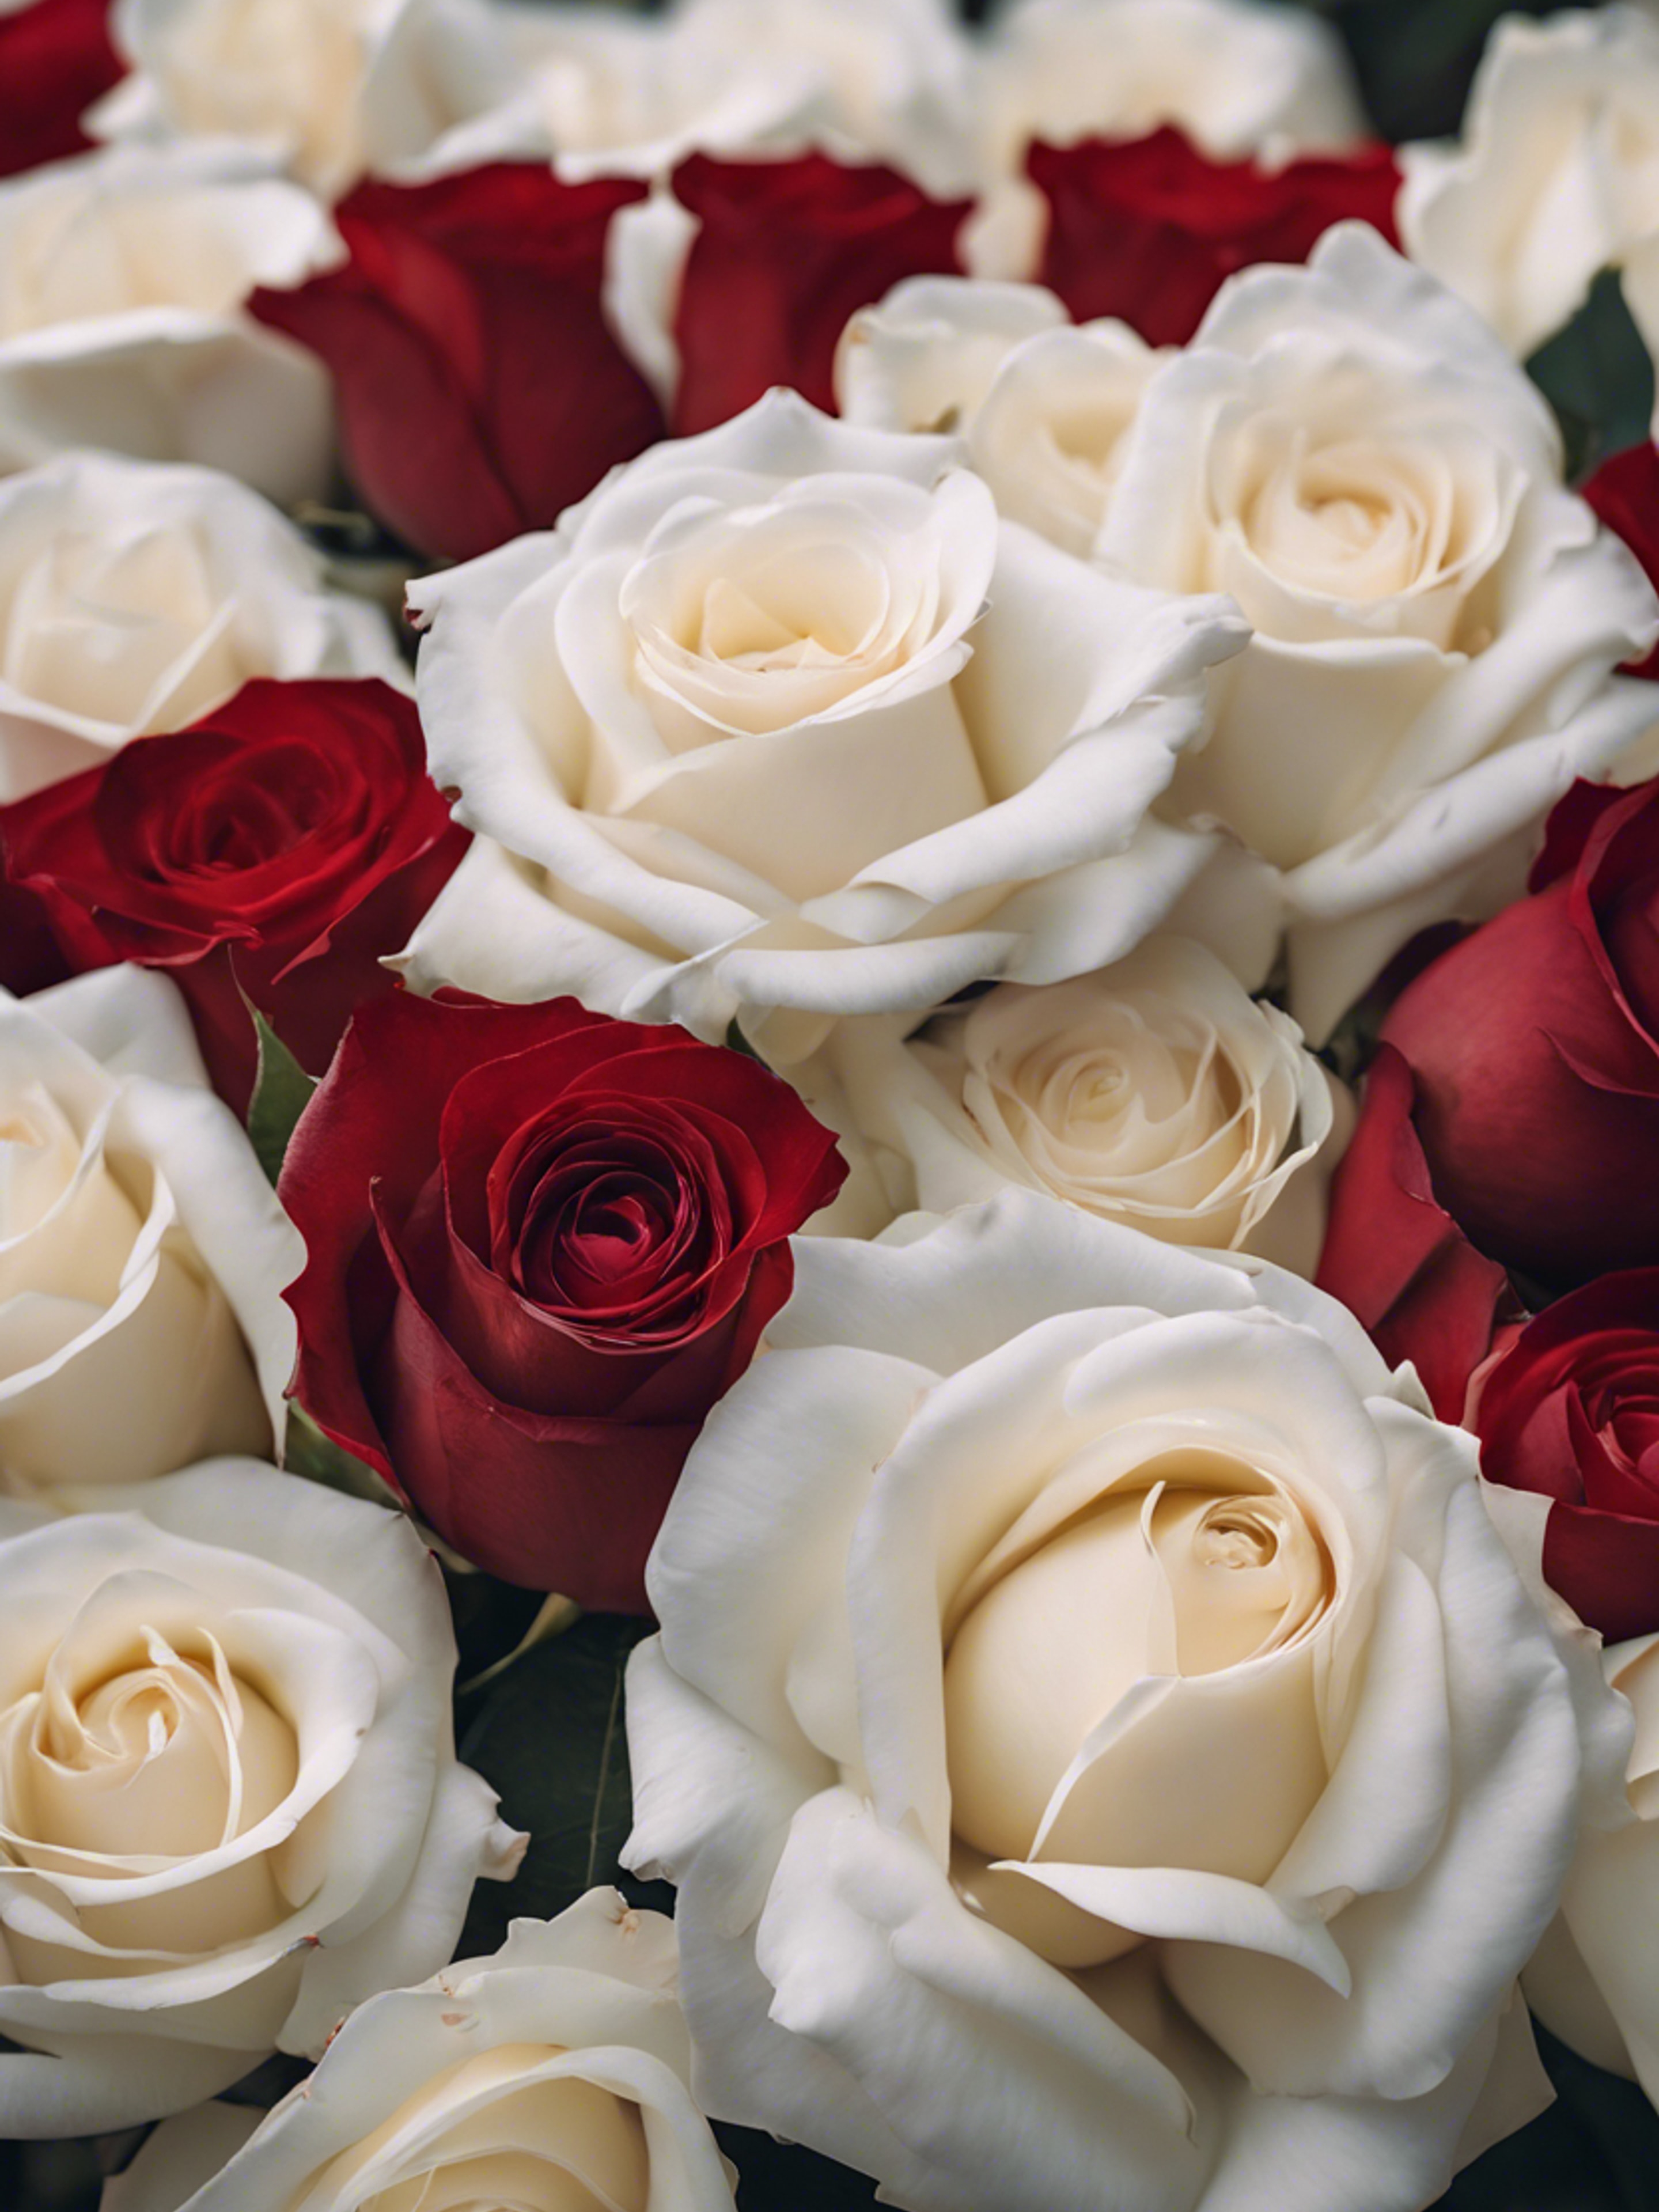 A cluster of white roses with a single red rose nestled in the middle. Обои[ffa8b13685ab483b9eca]